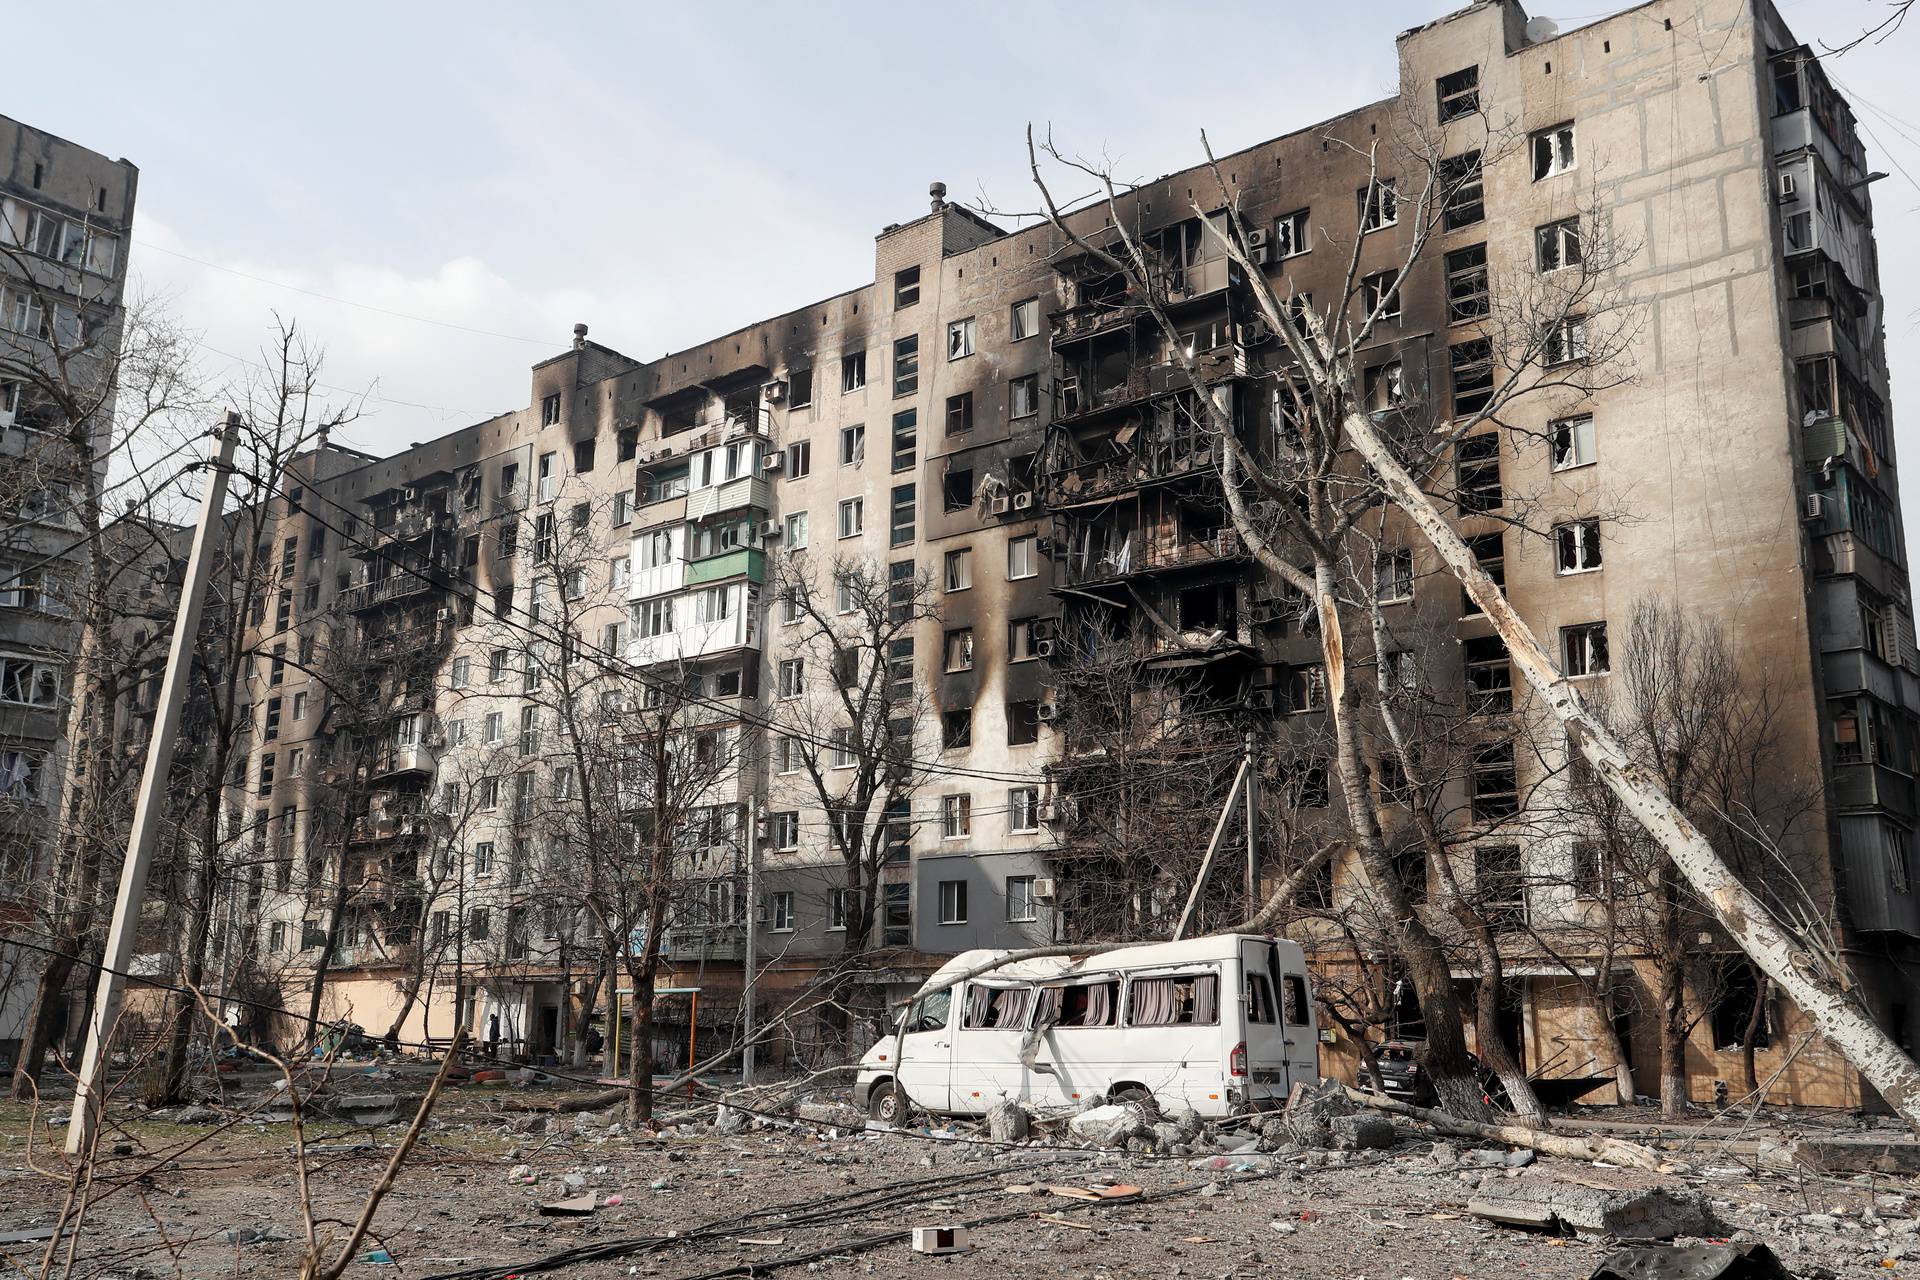 A view shows a destroyed apartment building in the besieged city of Mariupol